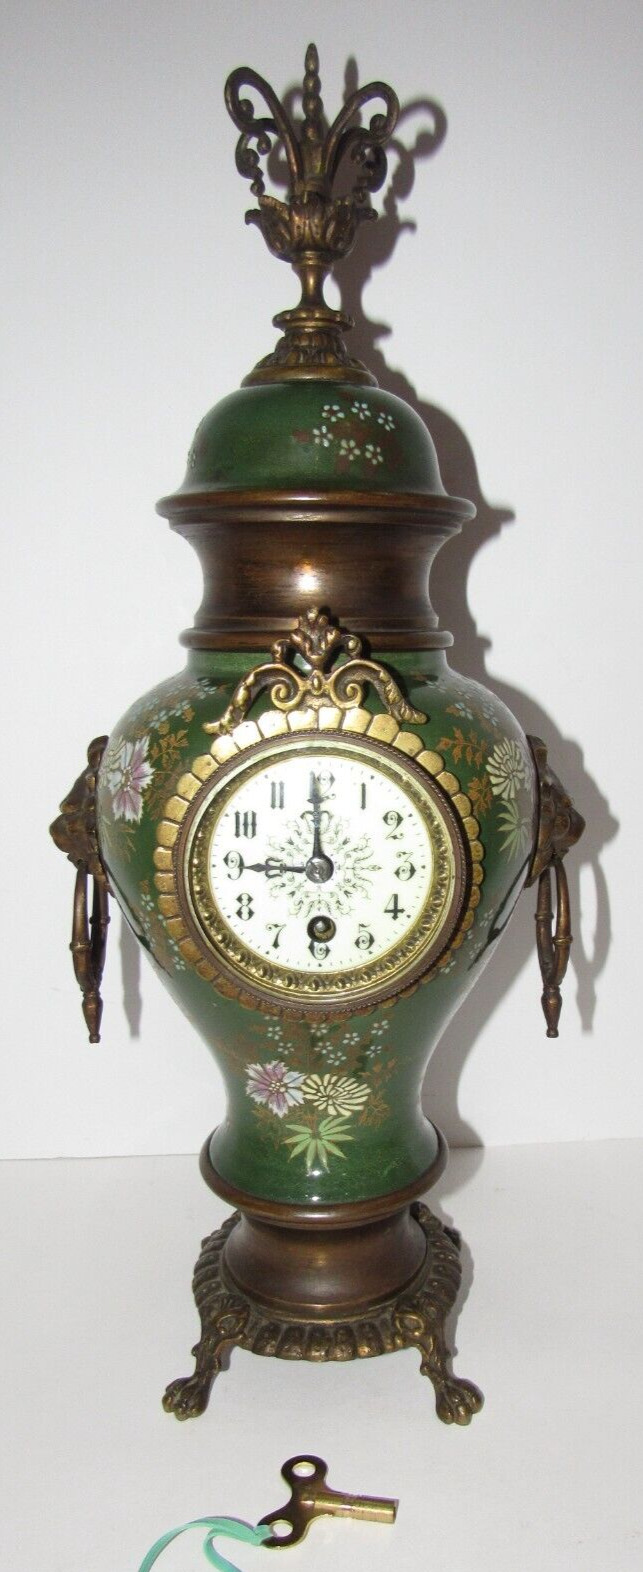 Antique French Victorian Porcelain & Brass Mantel Clock 8-Day Timepiece